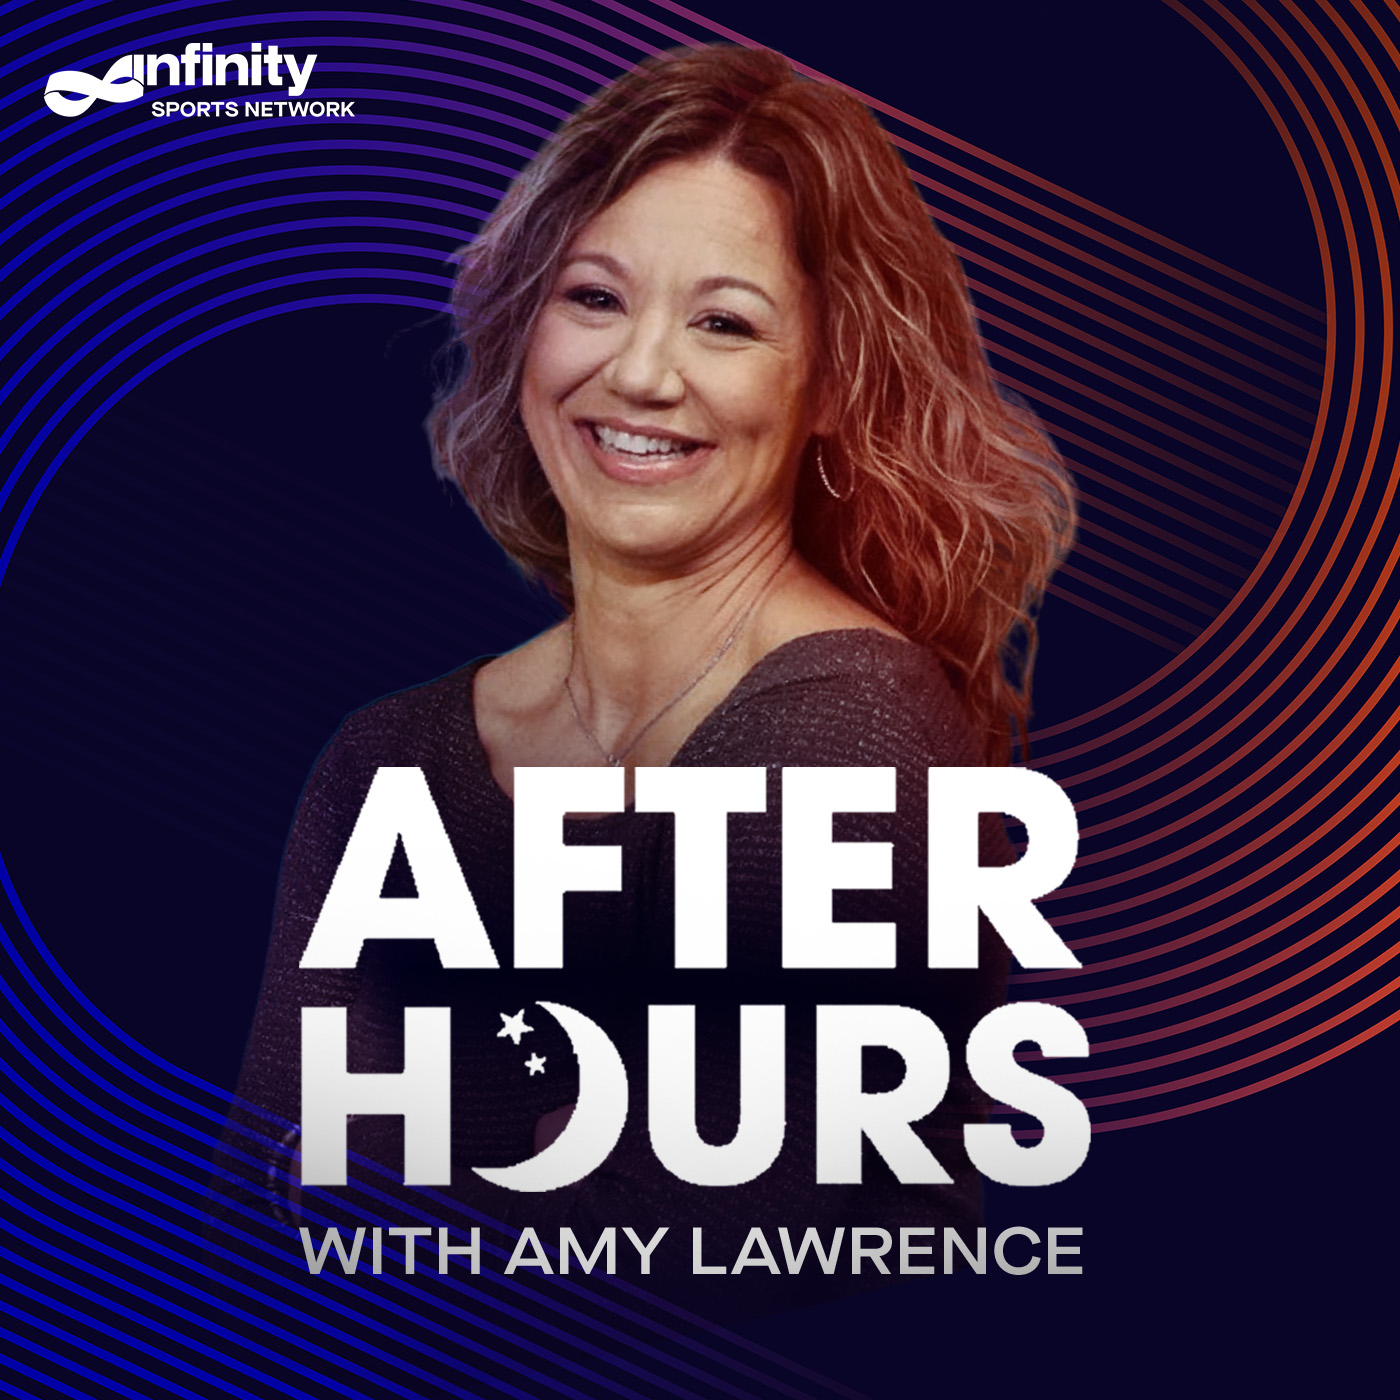 9-27-21 After Hours with Amy Lawrence PODCAST: Hour 4